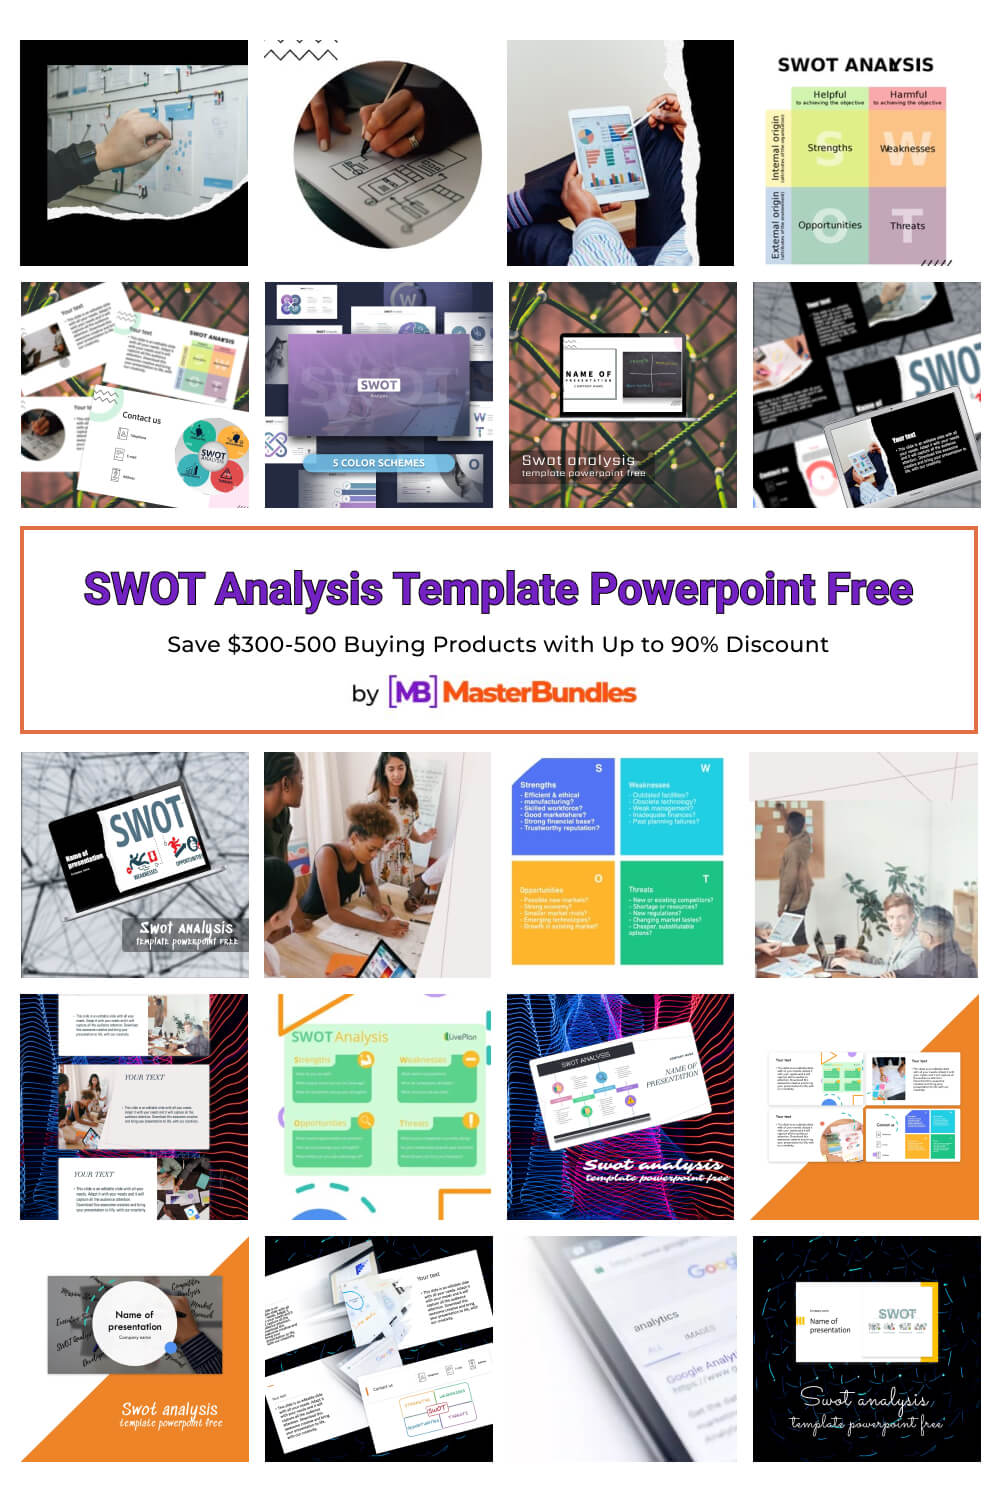 swot analysis template powerpoint free pinterest image.